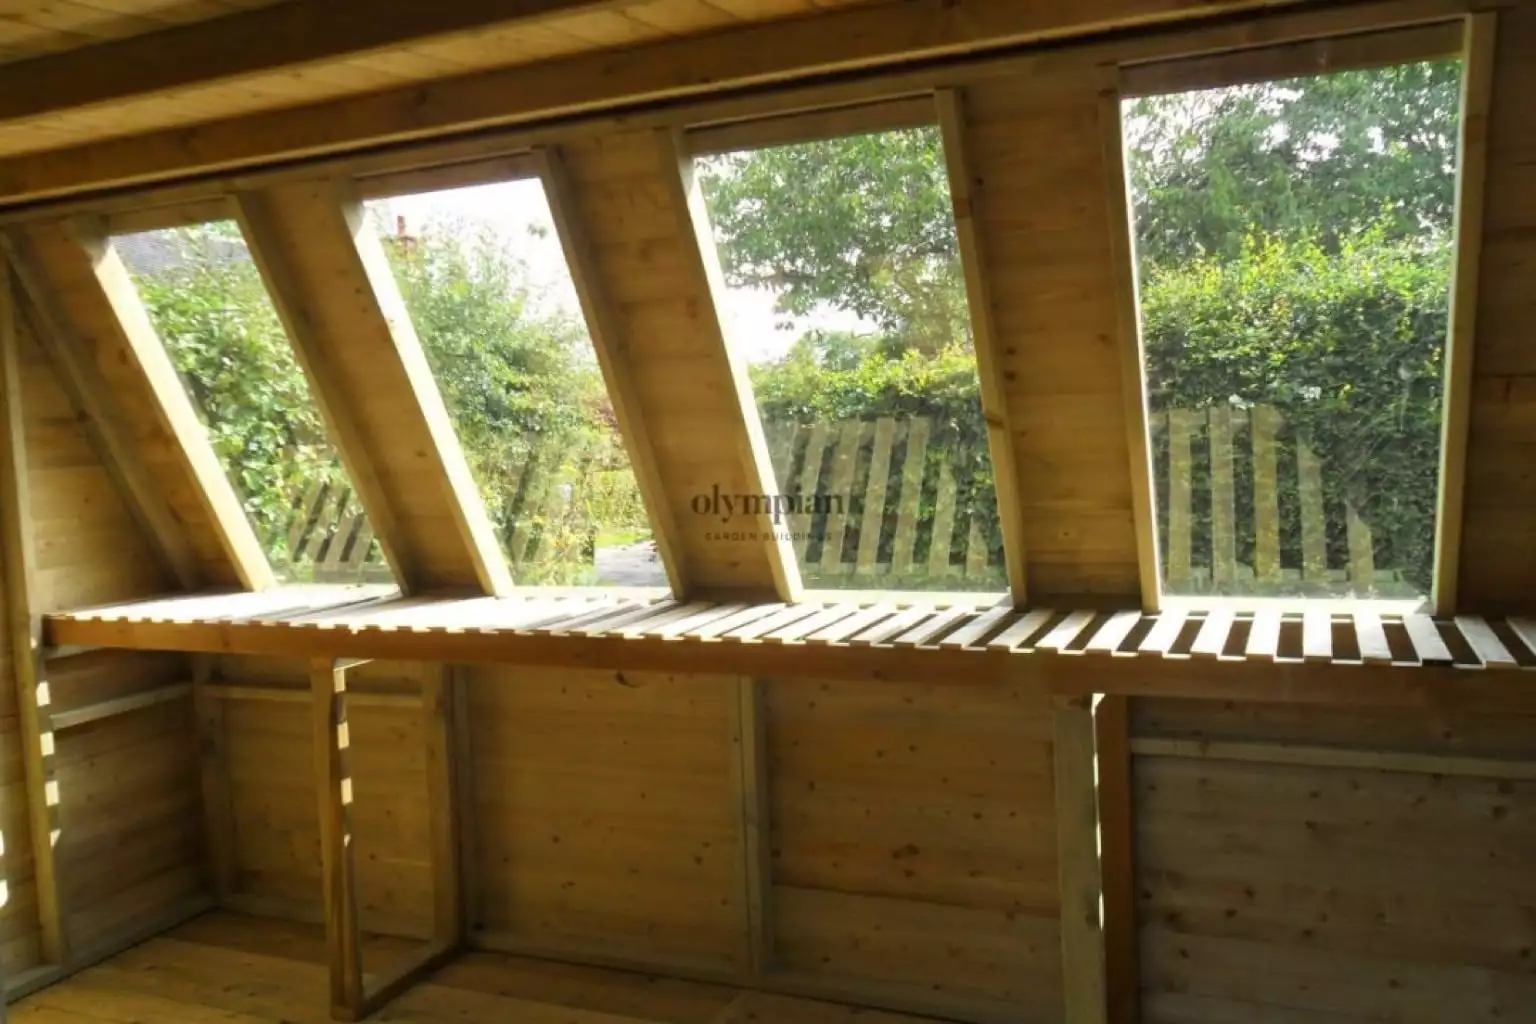 Internal view of Solar Potting Shed